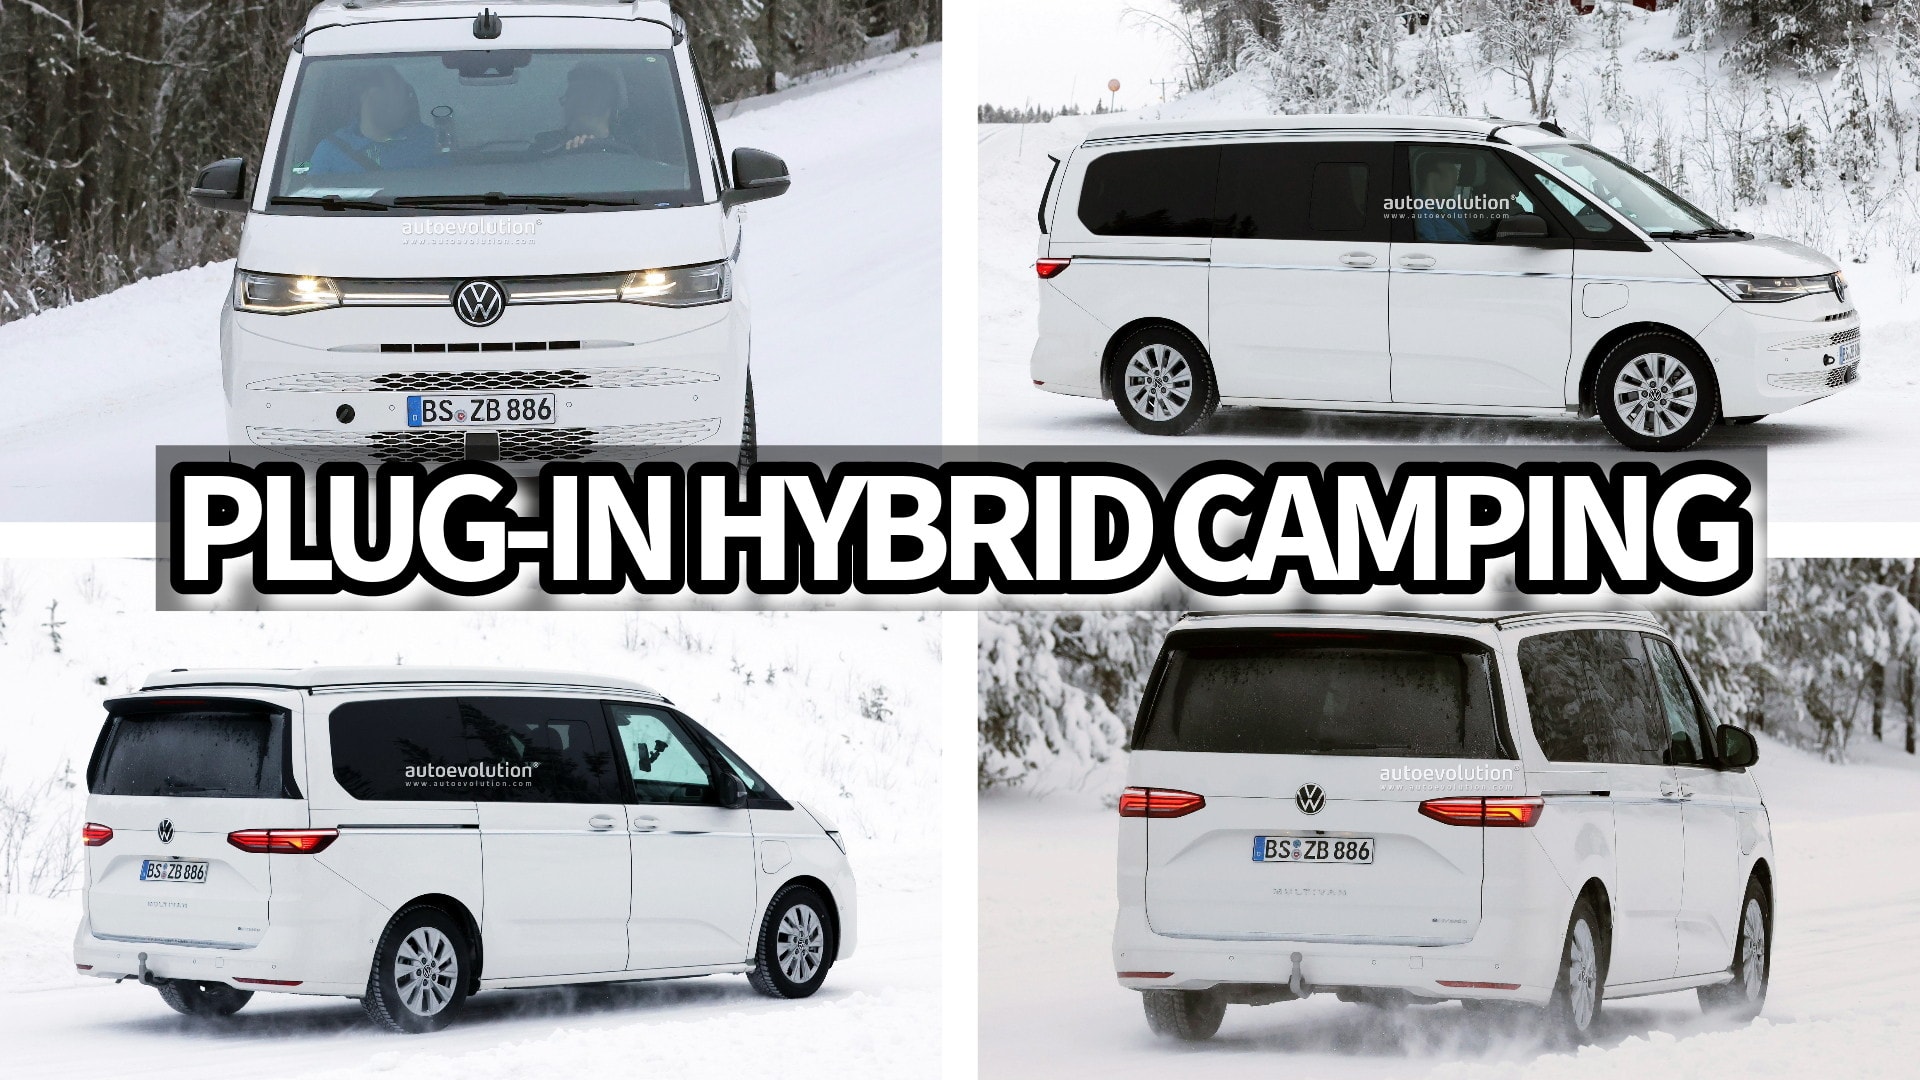 2024 VW California Camper Van Is a Mobile Home Away From Home With PHEV